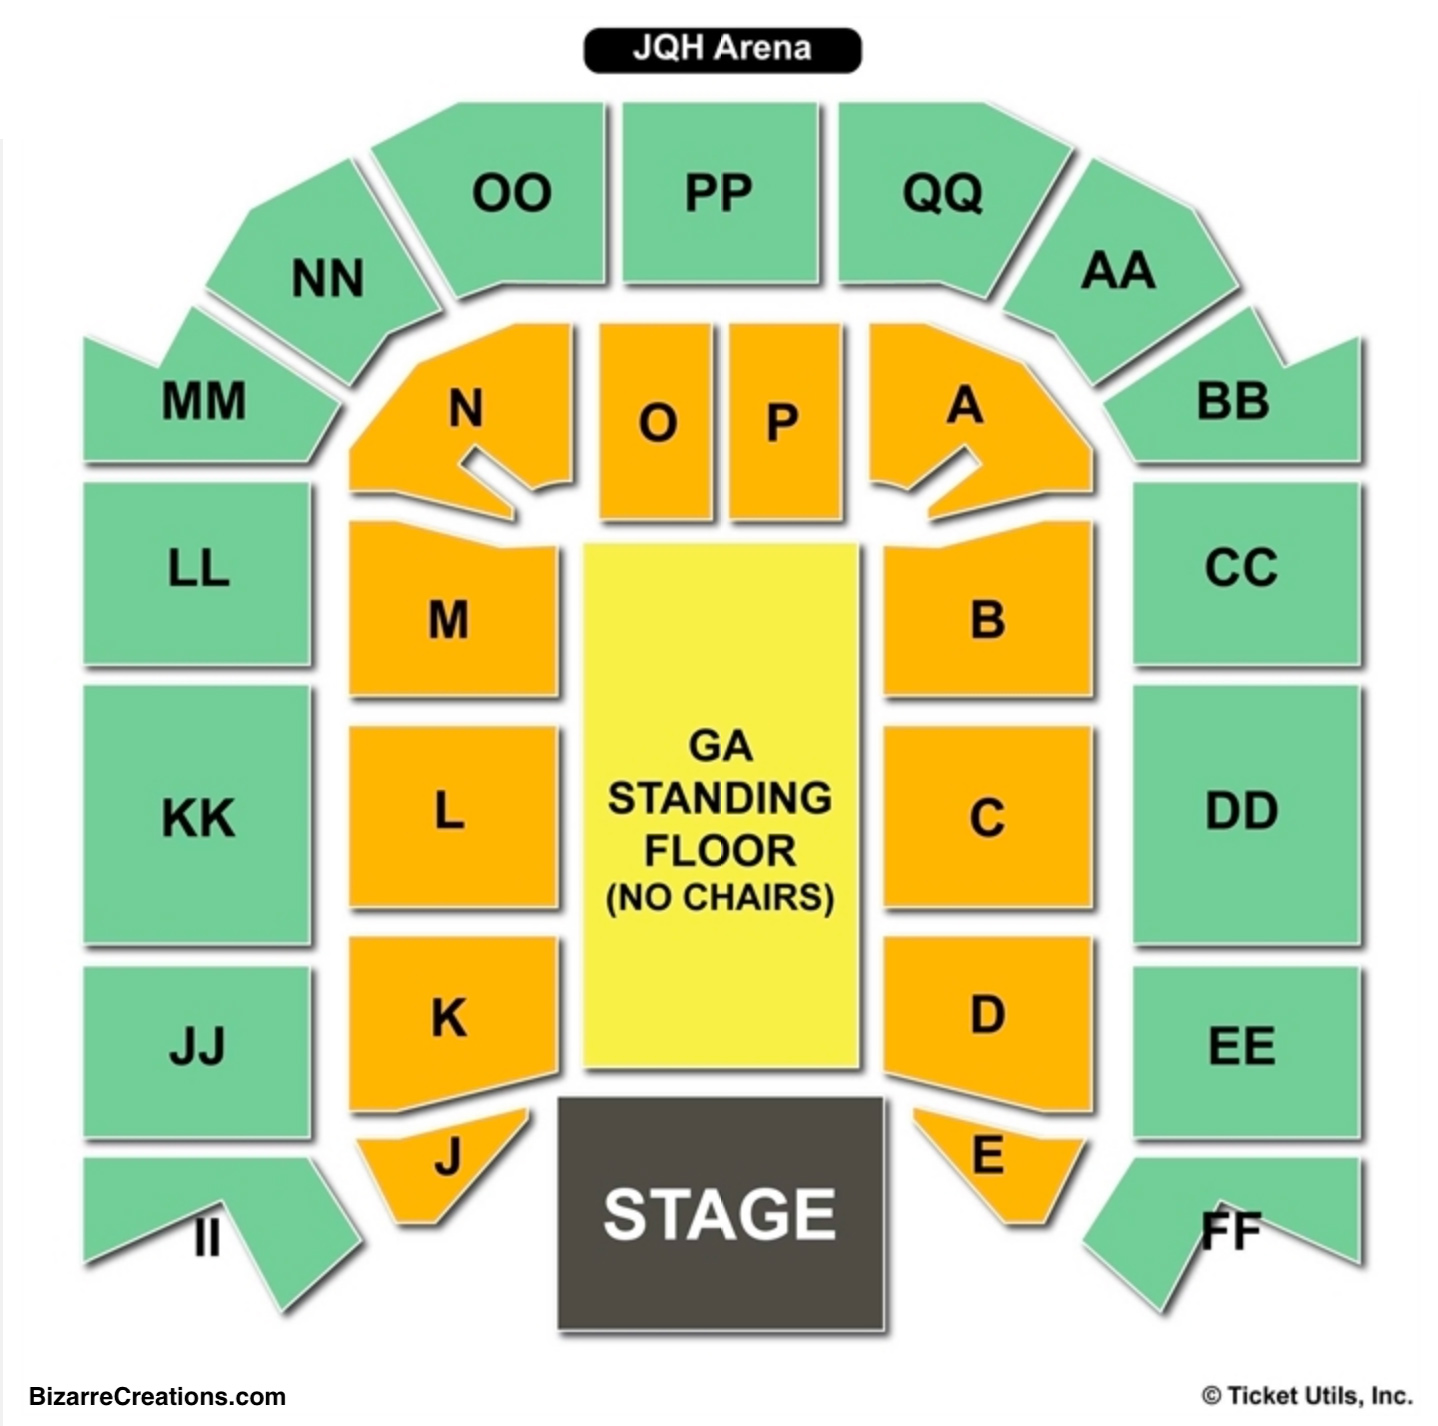 JQH Arena Concert Seating Chart.